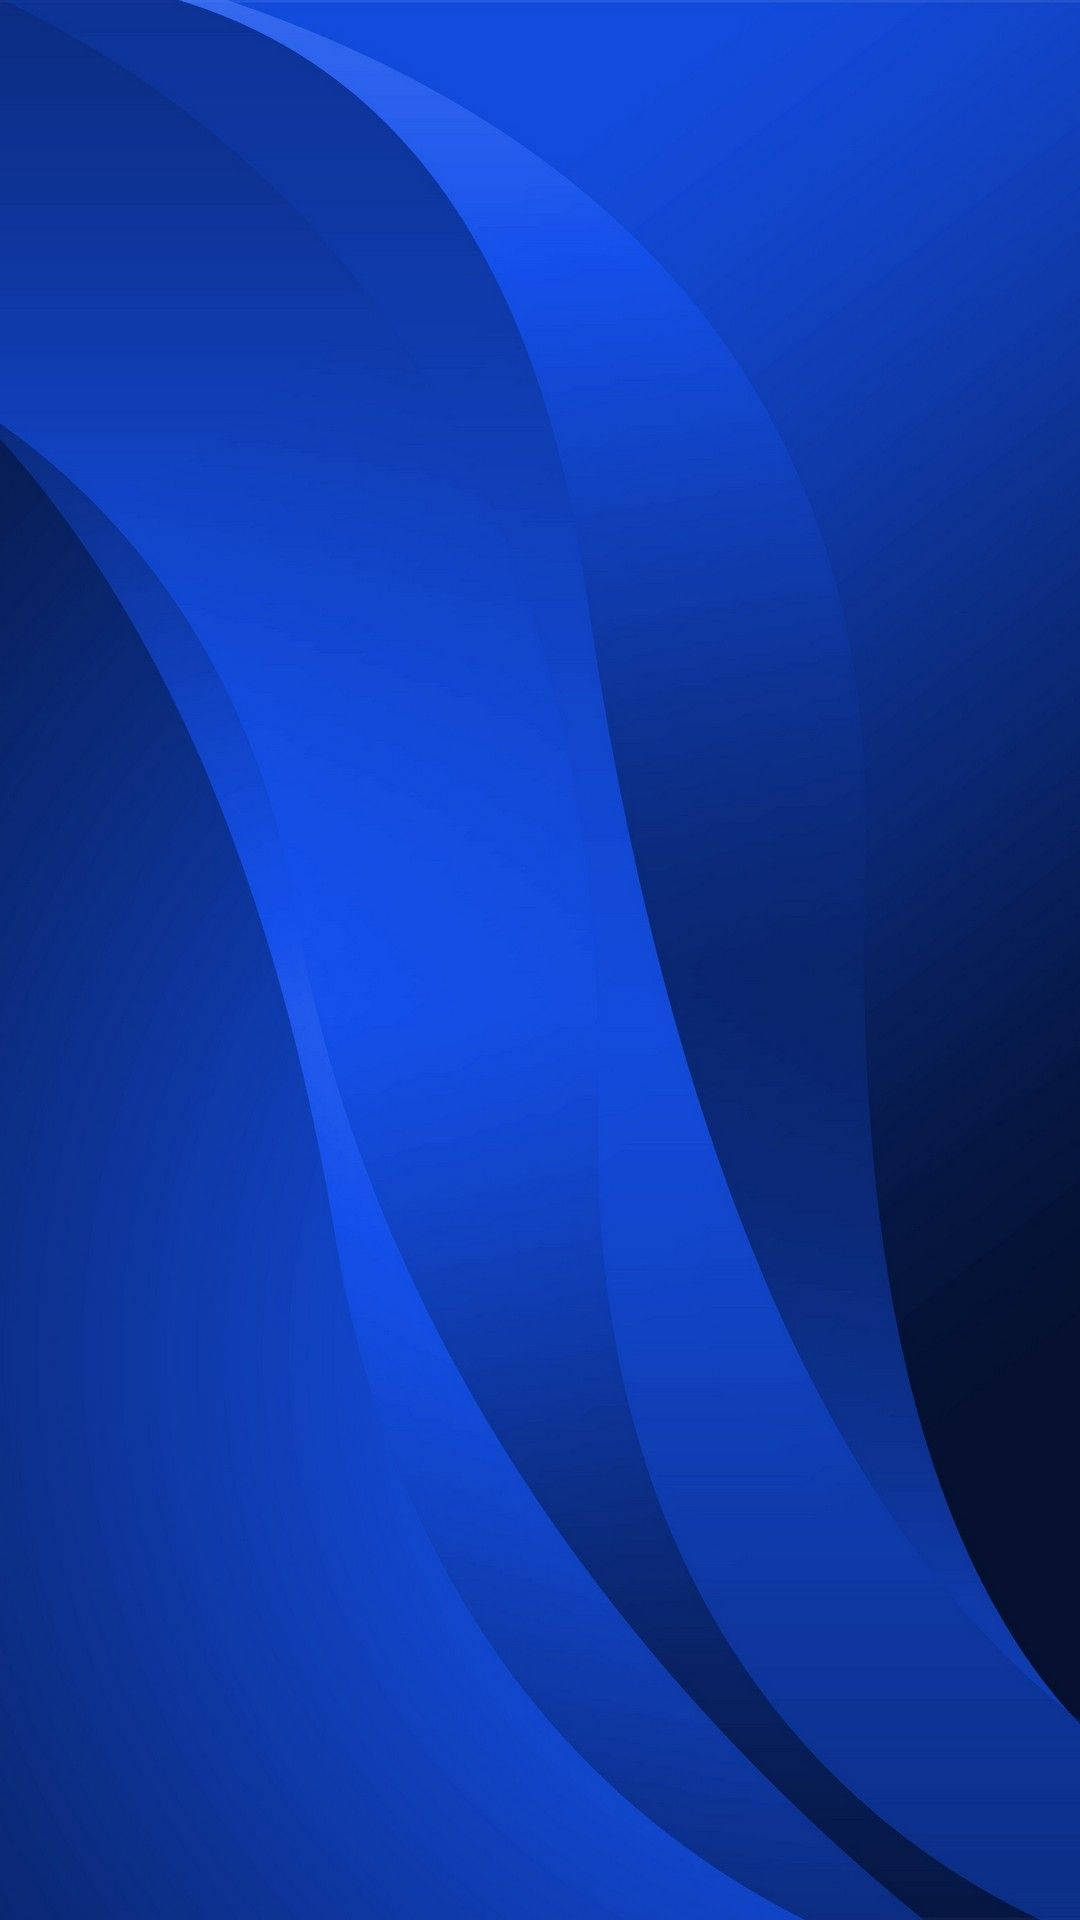 Blue Abstract Background With A Wave Pattern Wallpaper